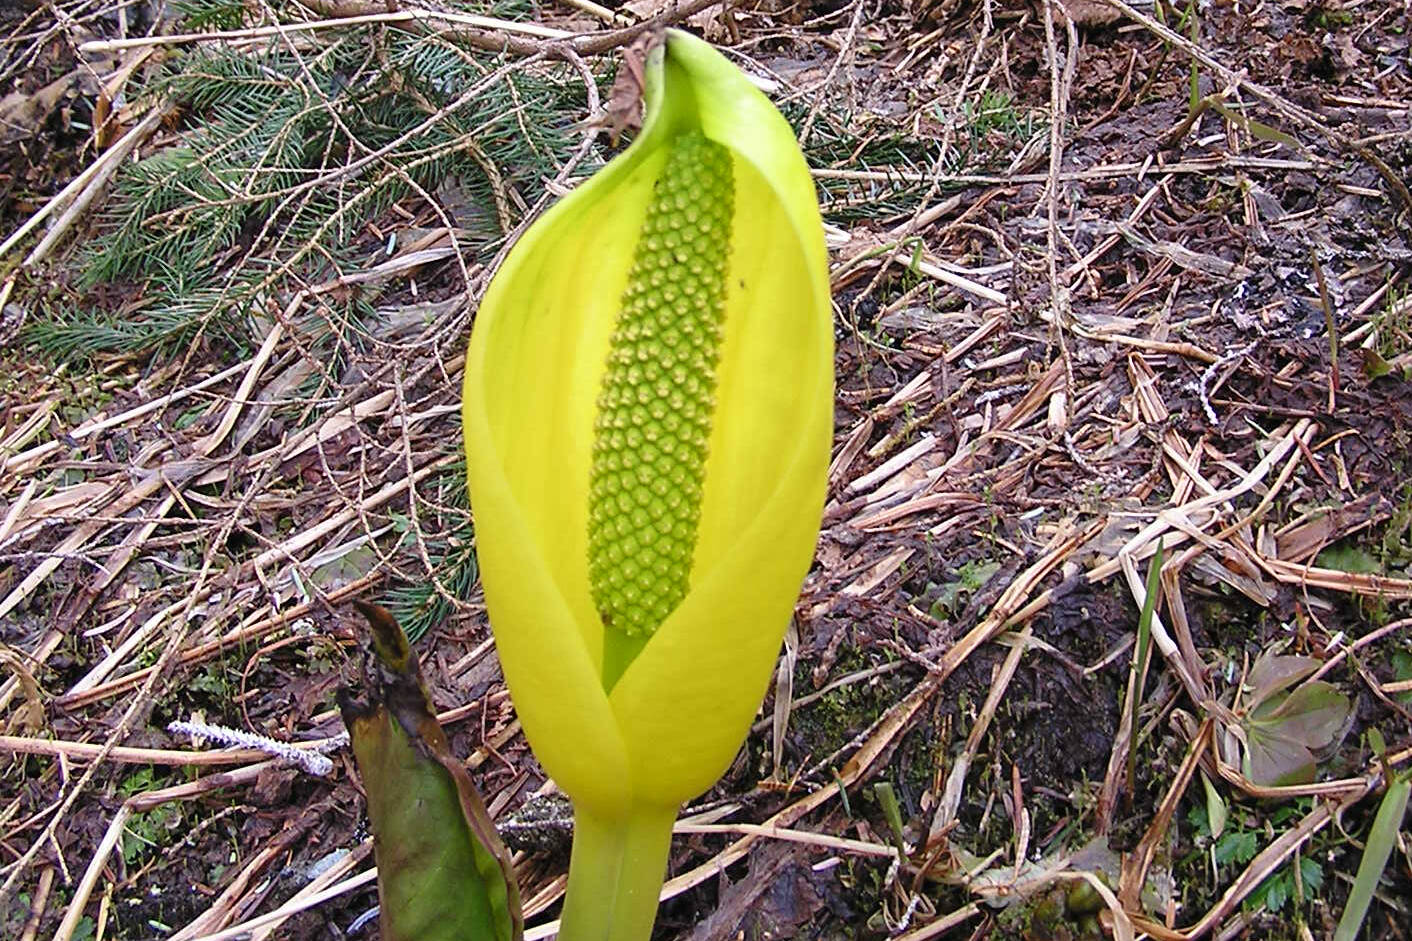 A skunk cabbage inflorescence shows the pointed stigmas of the female phase and the beginning of pollen presentation for the male phase. (Mary F. Willson / For the Juneau Empire)